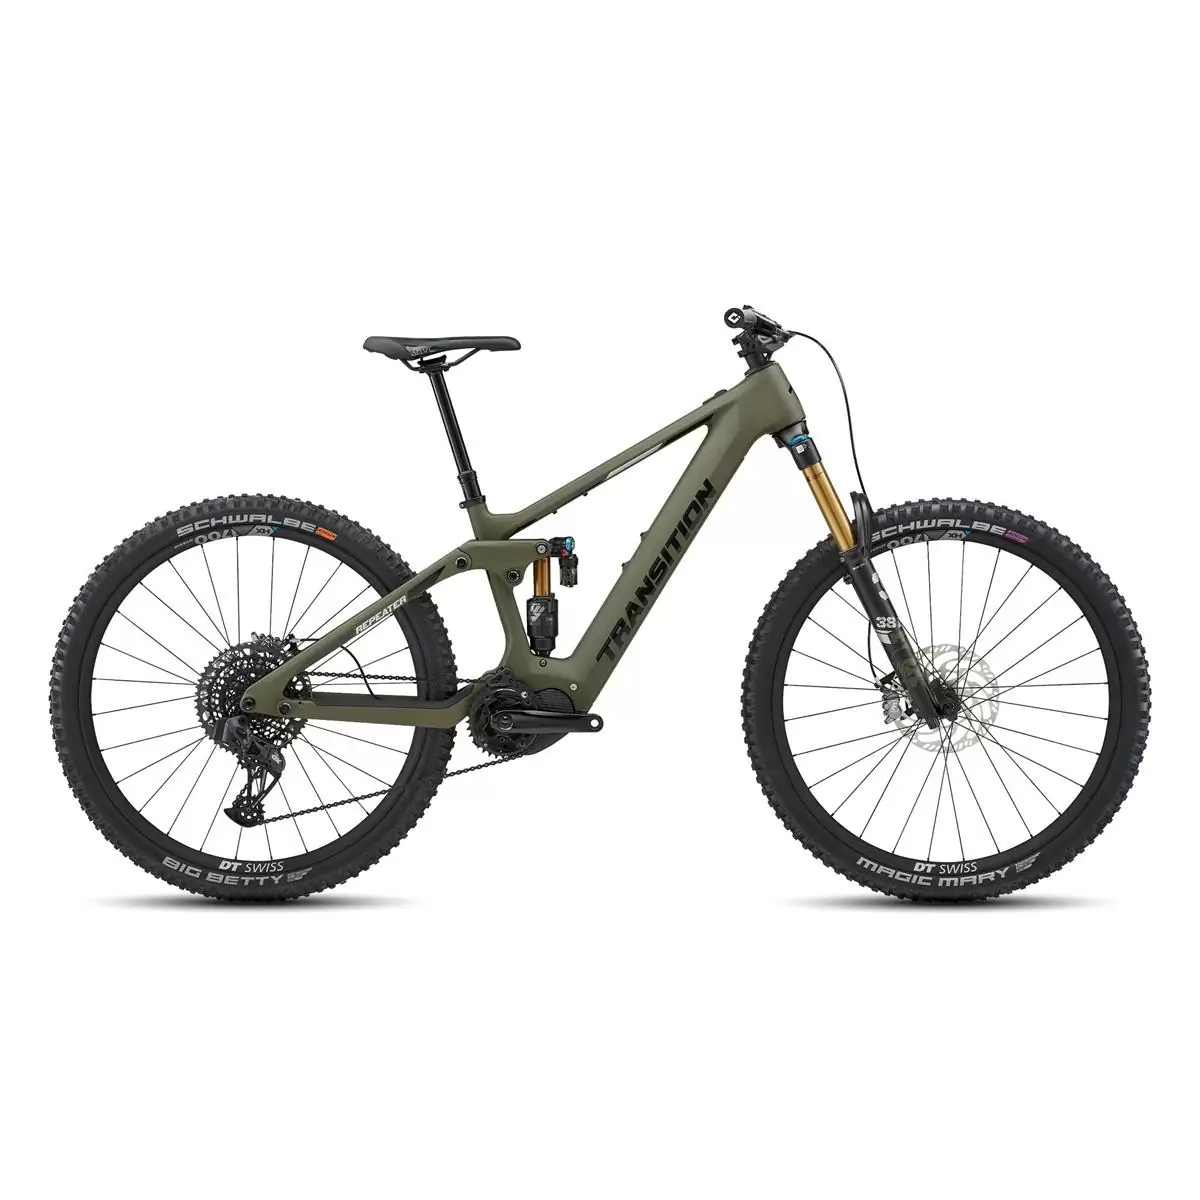 Repeater Carbon AXS 29'' 160mm 12v 630Wh Shimano EP8 Mossy Green Taglia M - image